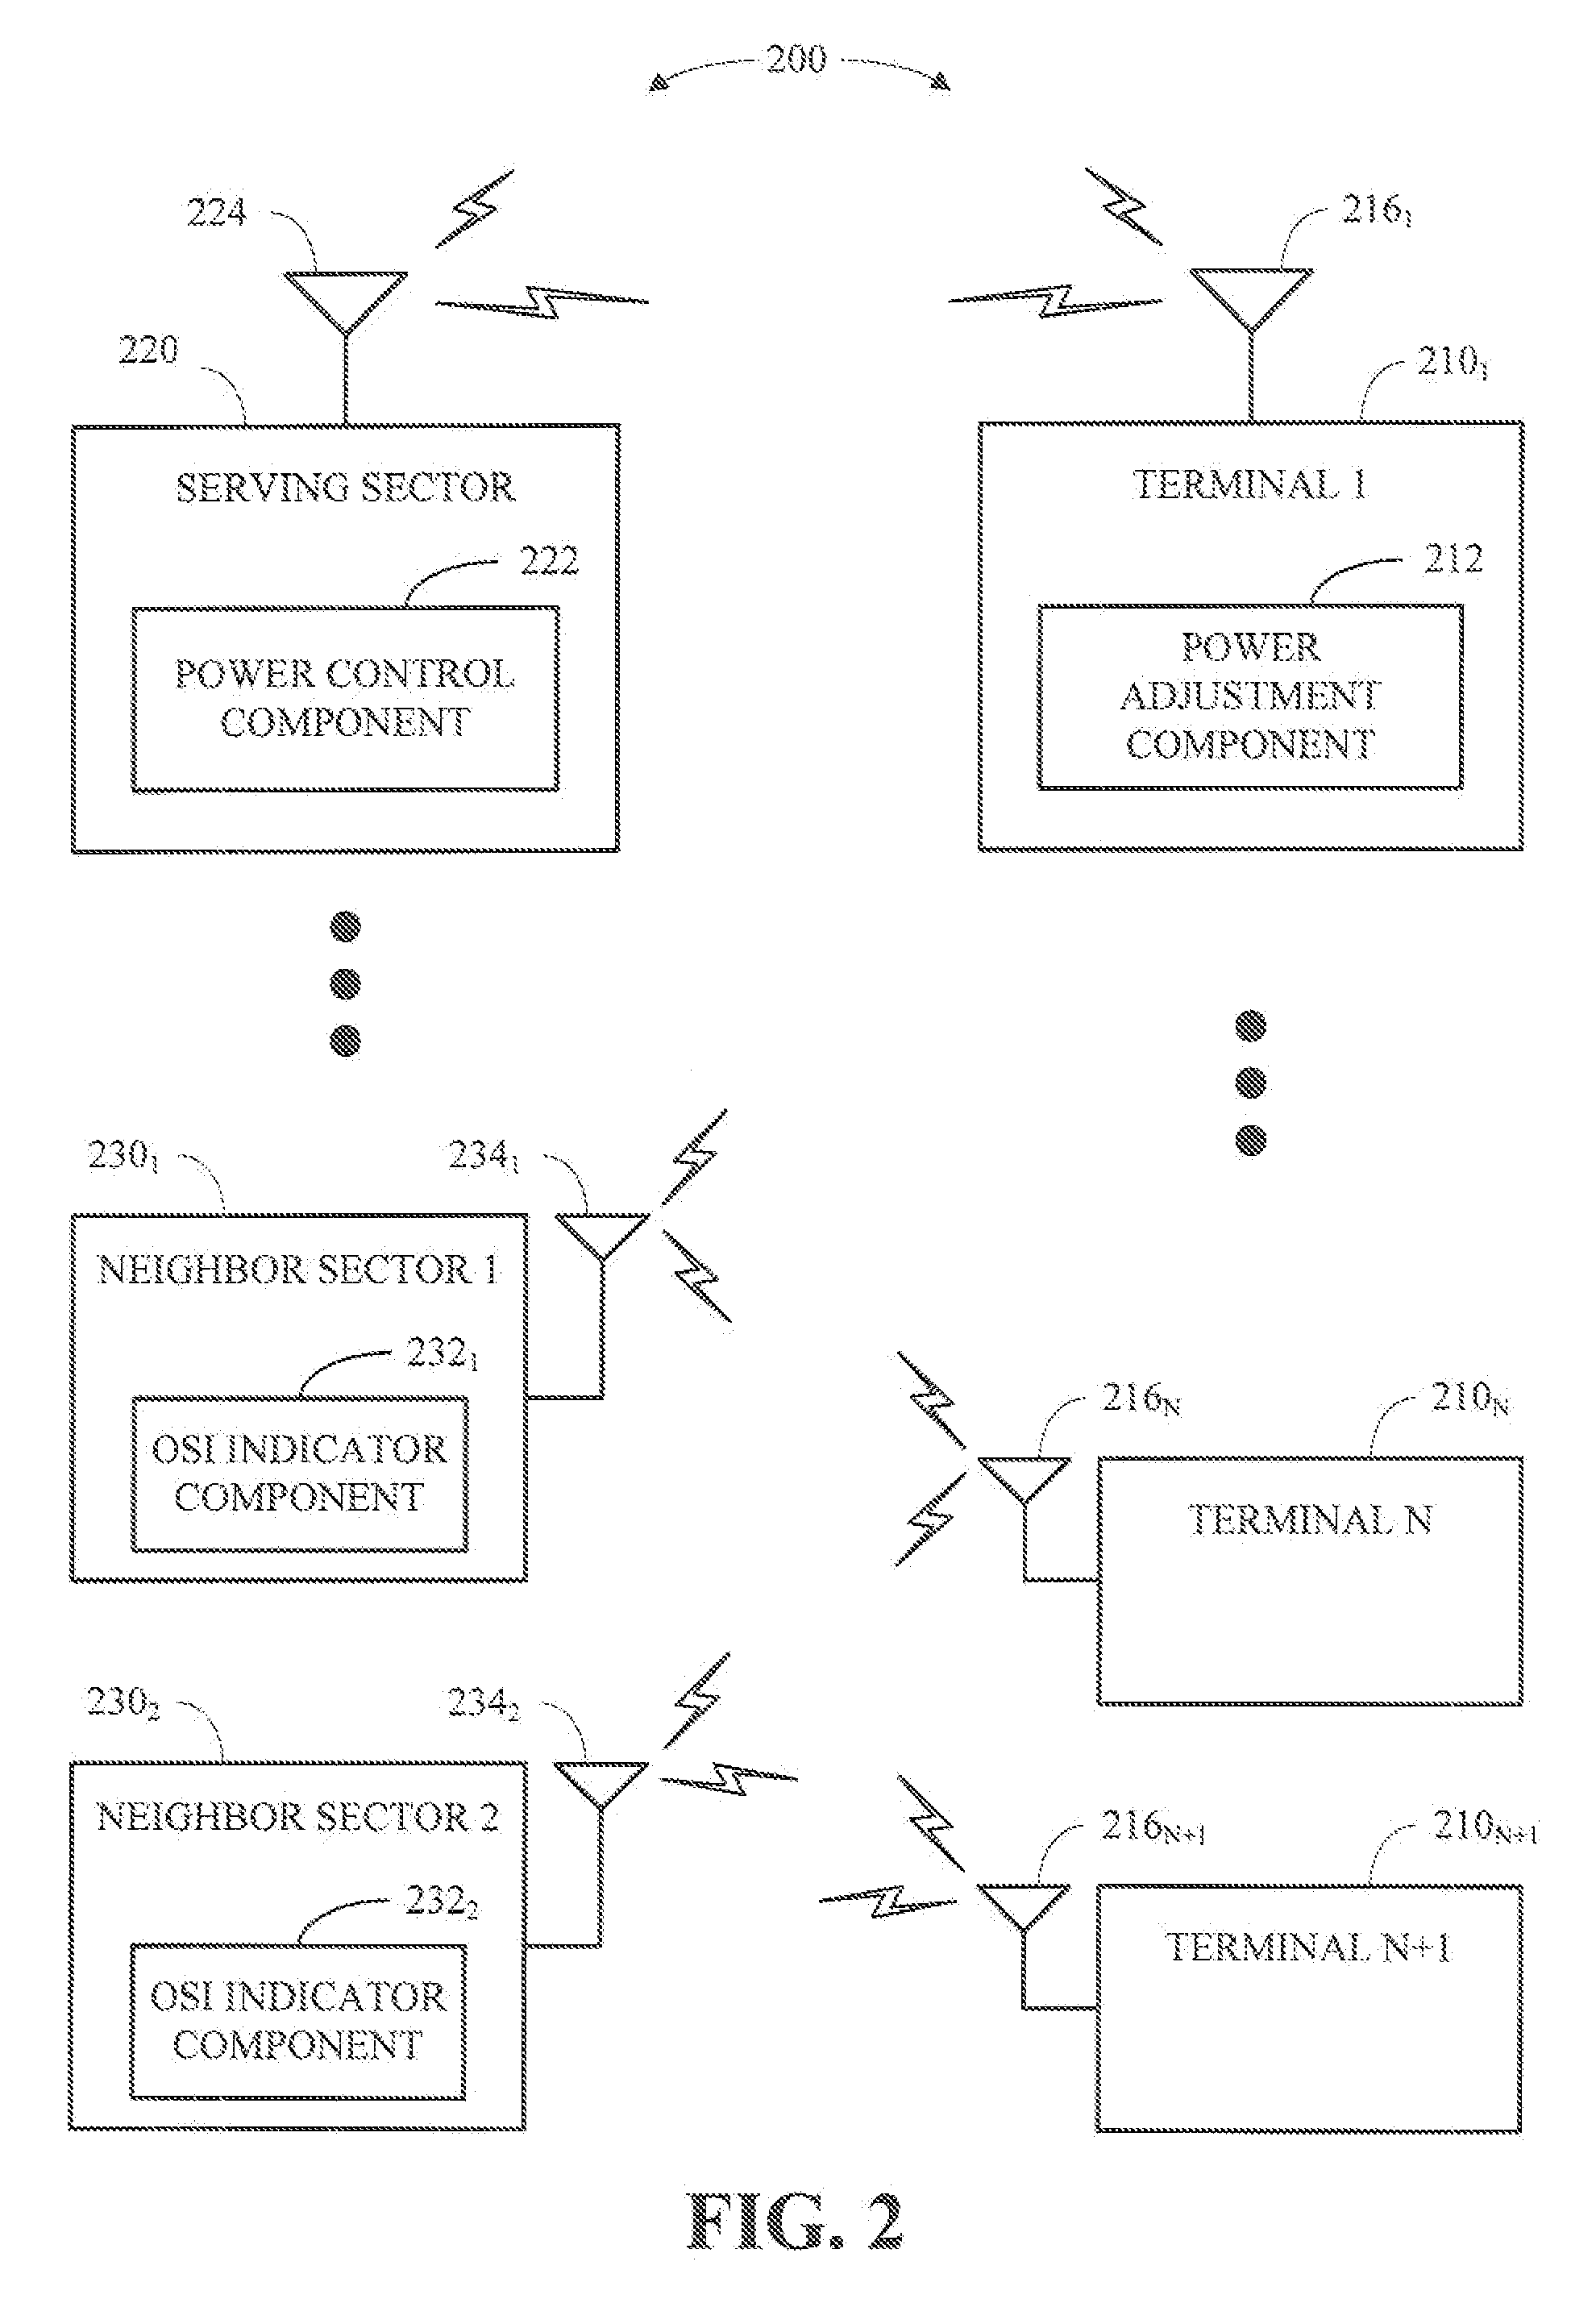 Method and apparatus for interaction of fast other sector interference (OSI) with slow osi